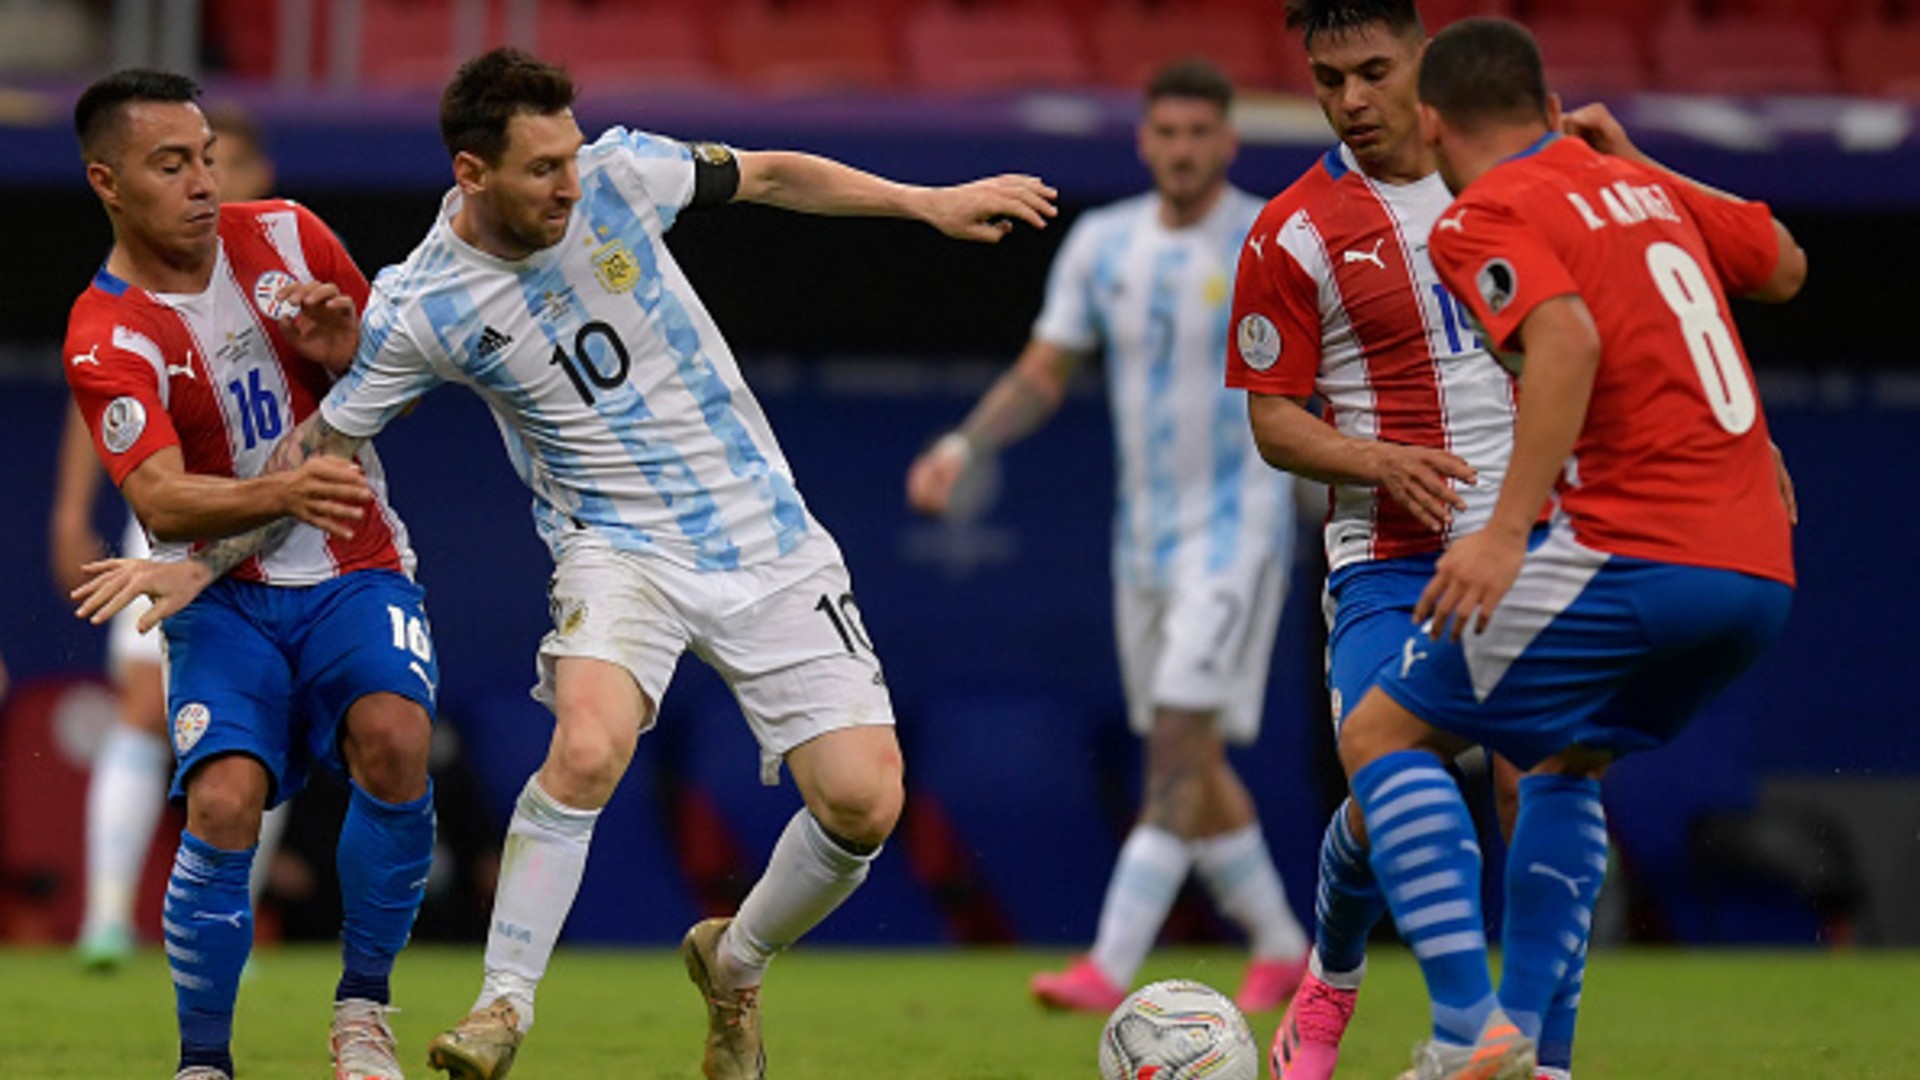 How to watch Bolivia vs Argentina in the Copa America 2021 from India?